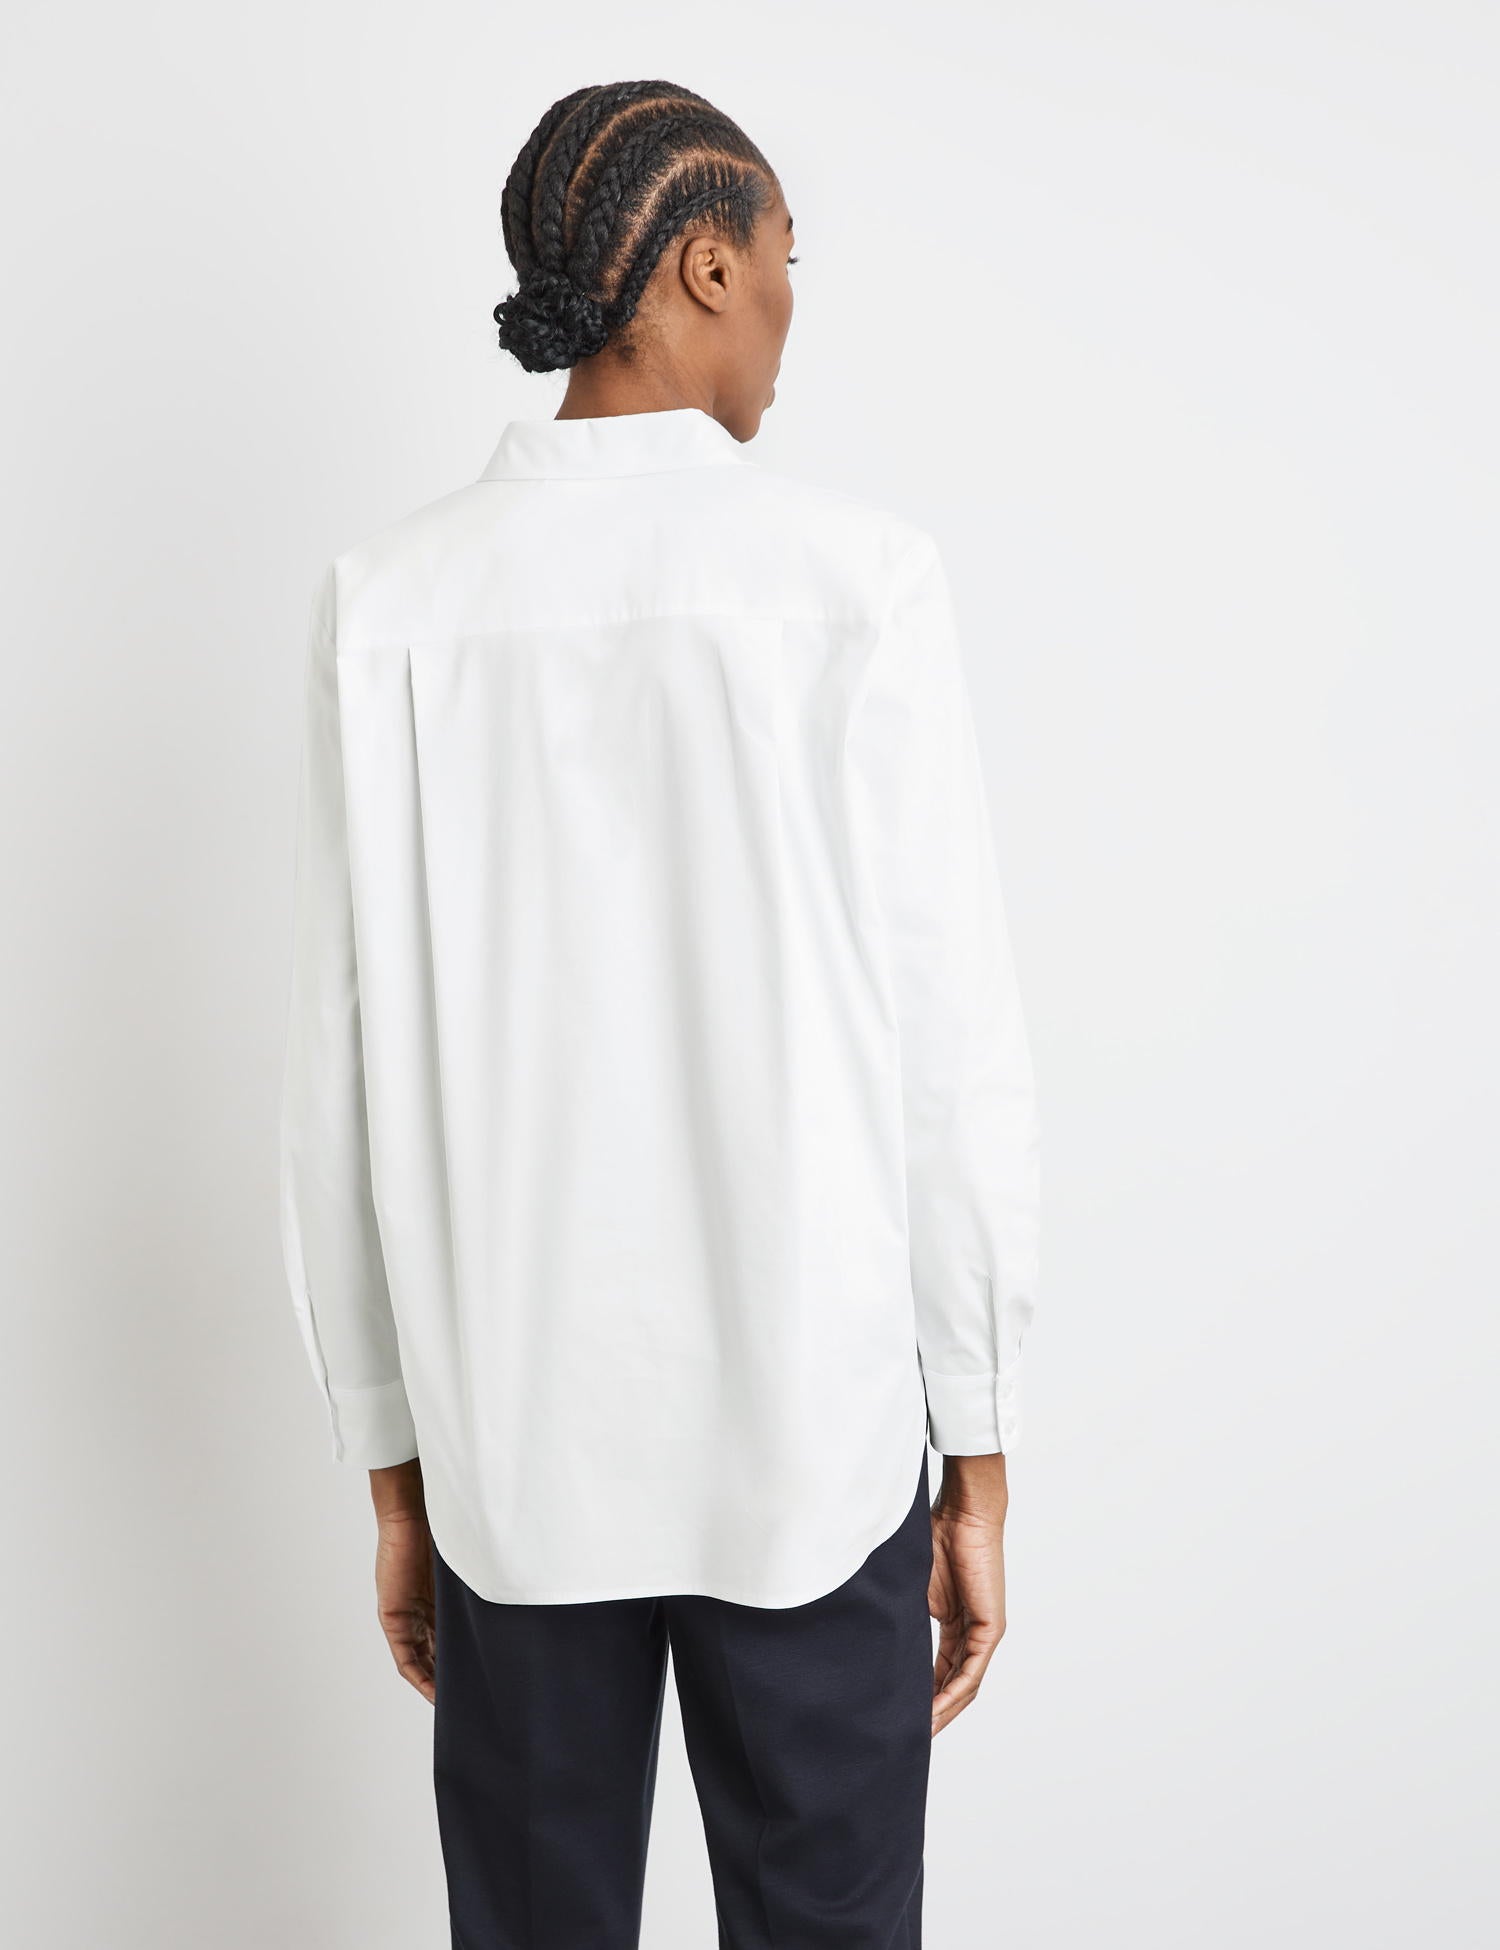 Simple Shirt Blouse With An Elongated Back_965033-31443_99600_06